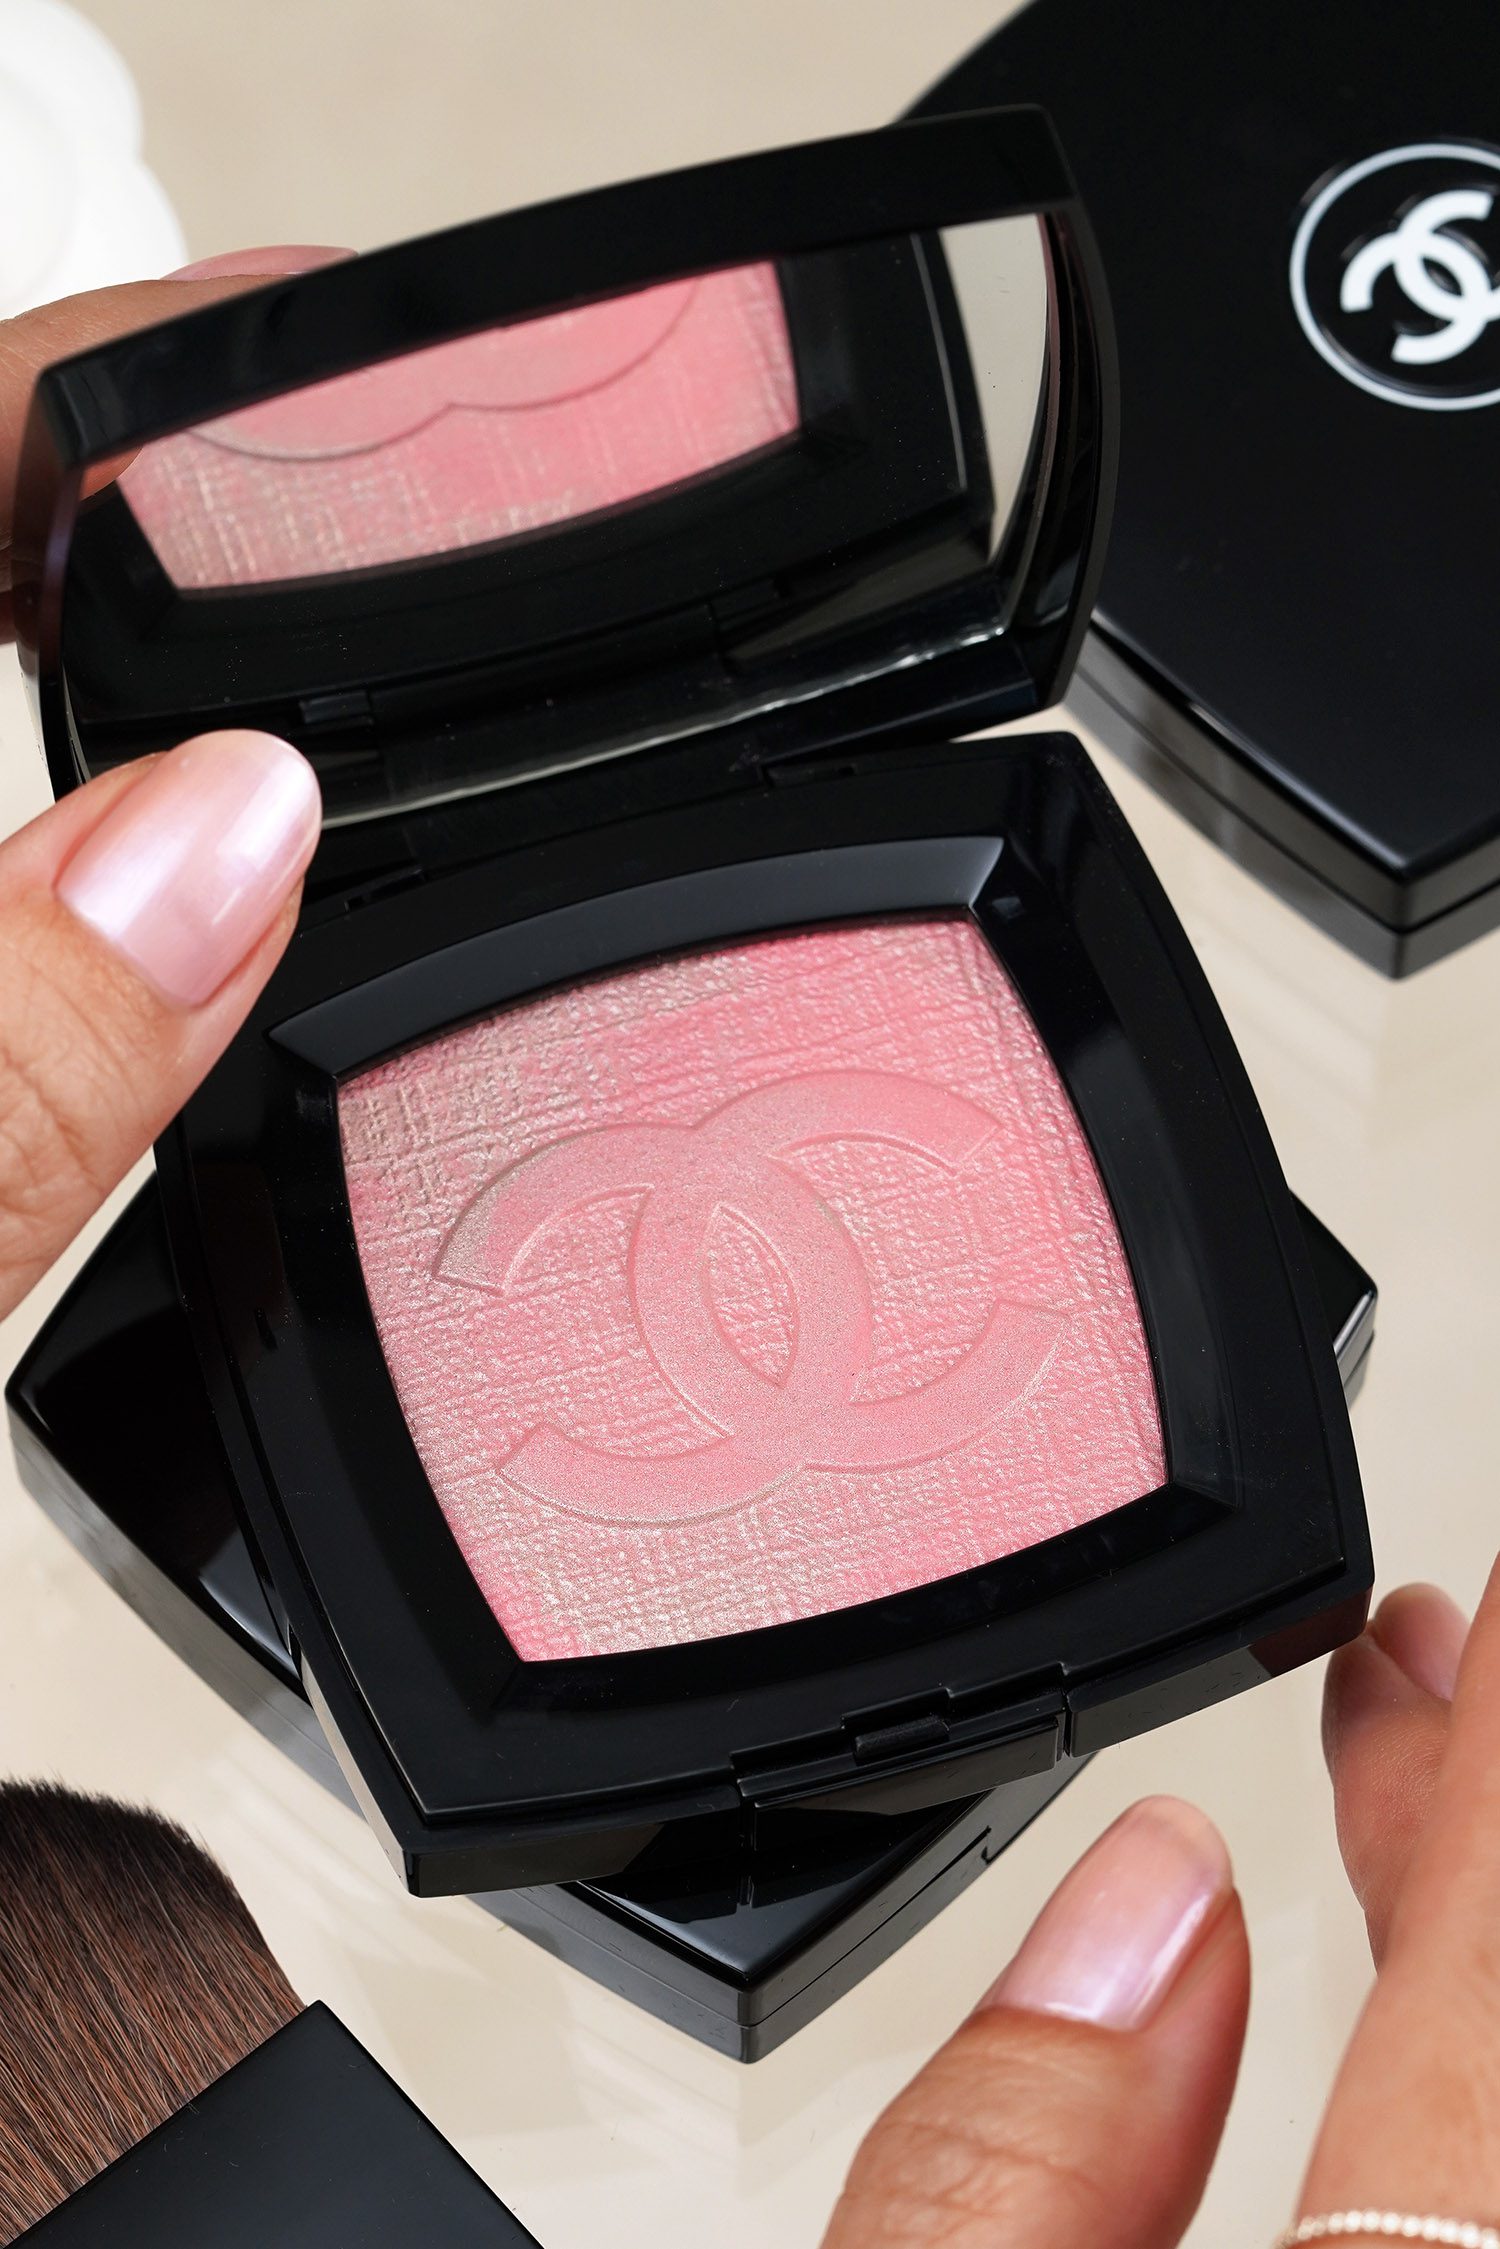 Chanel Delices Pastel de Chanel Collection The Beauty Look Book